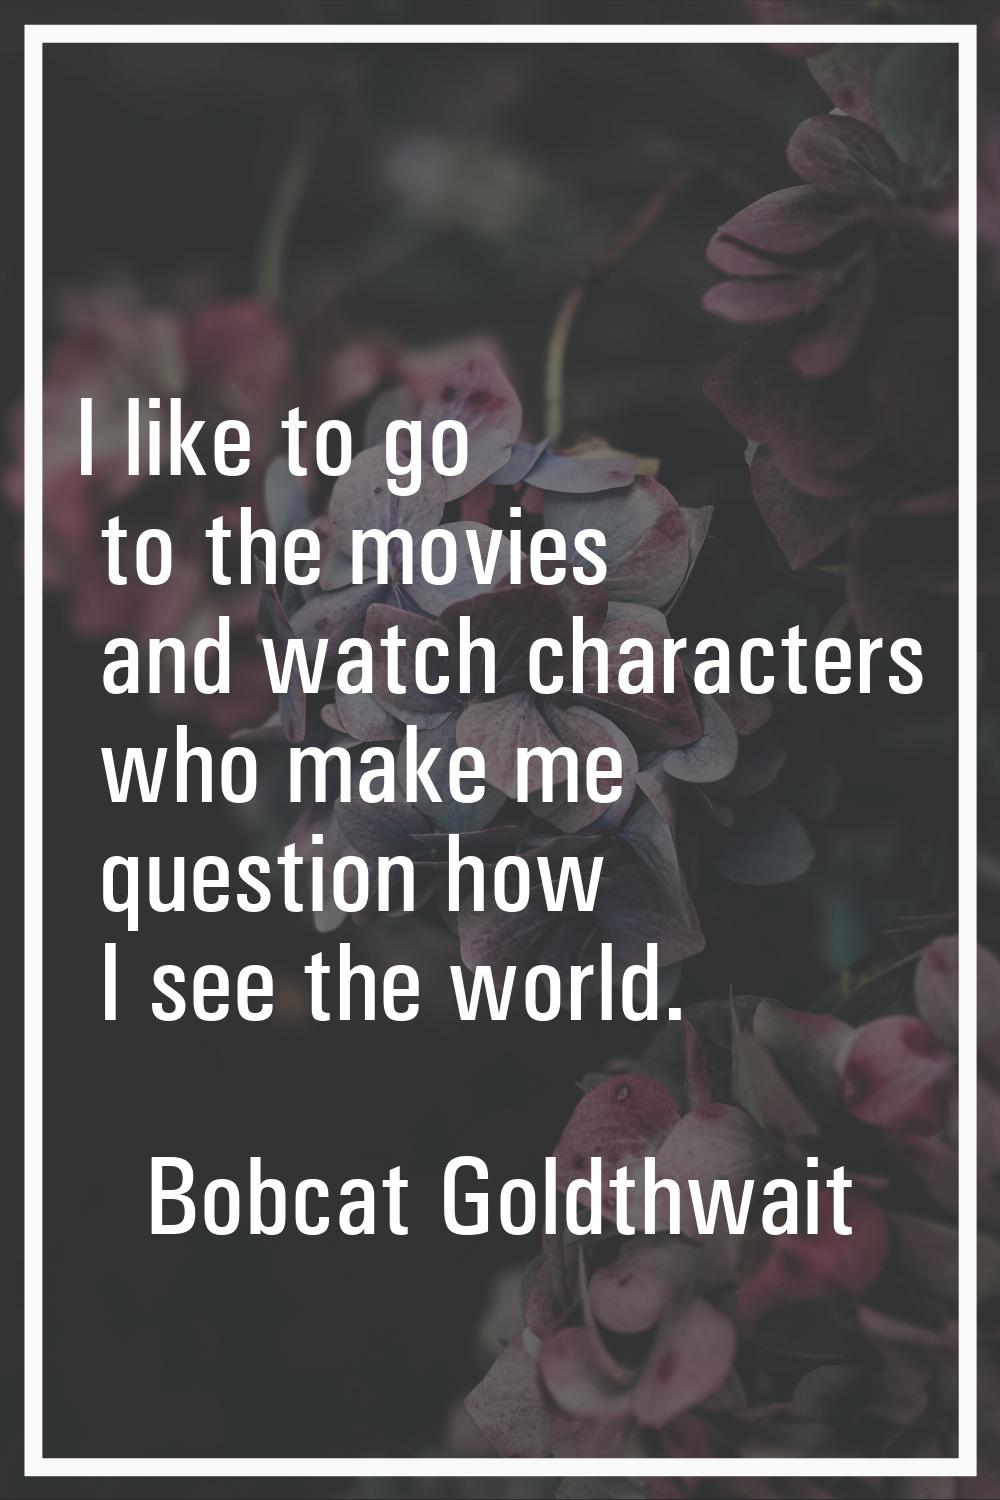 I like to go to the movies and watch characters who make me question how I see the world.